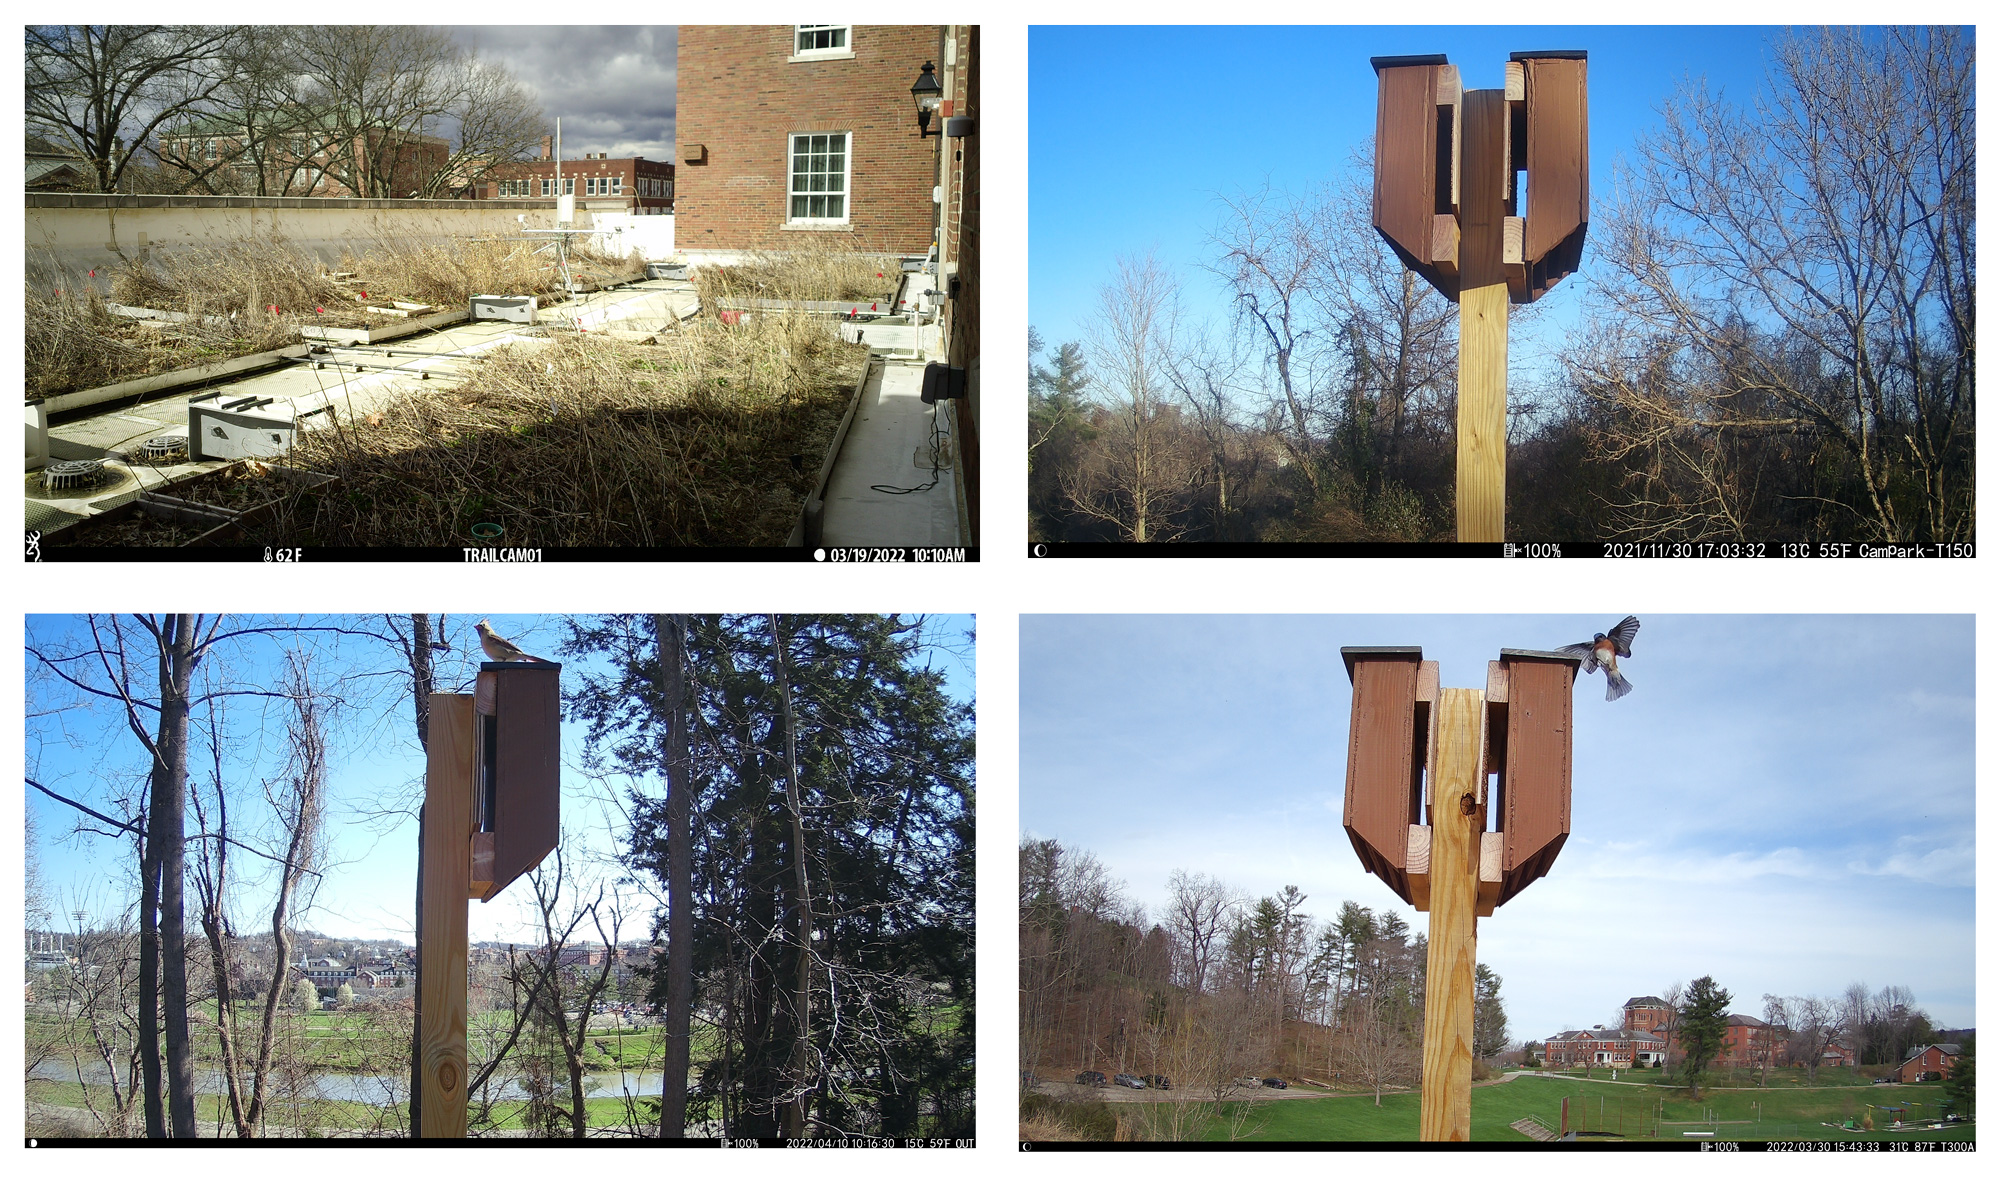 Images from four game cameras showing the four different bat house locations on campus.